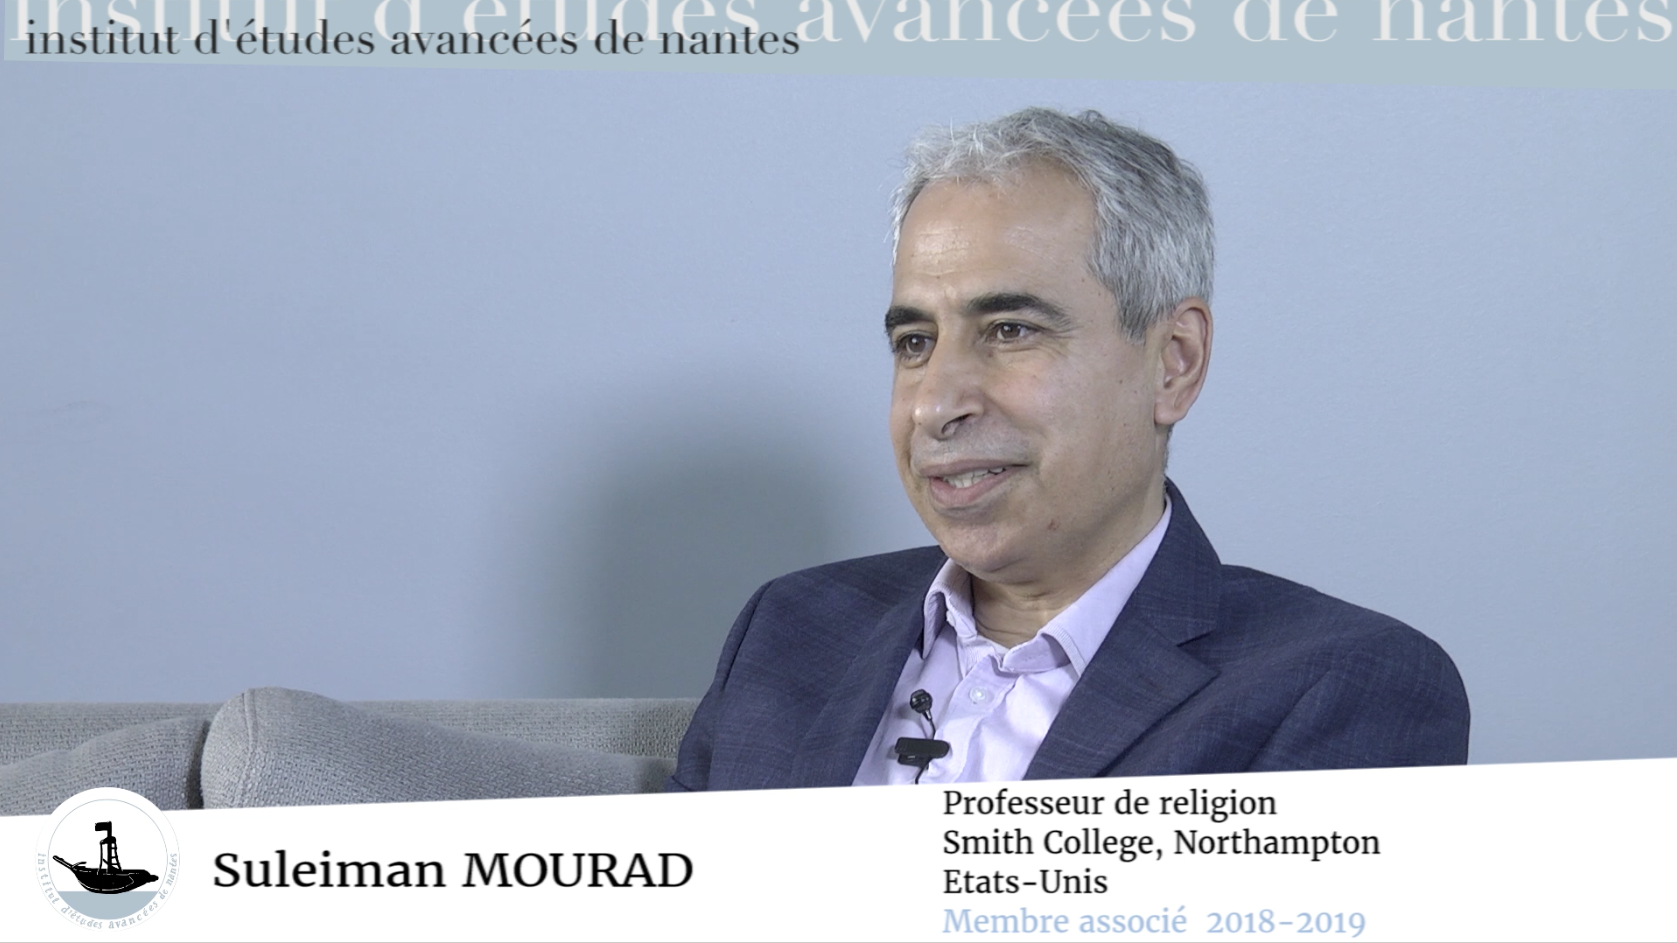 #144 - Suleiman Mourad, membre associé - " I like to come back in order to get the intellectual and stimulating kind of knowlegment "